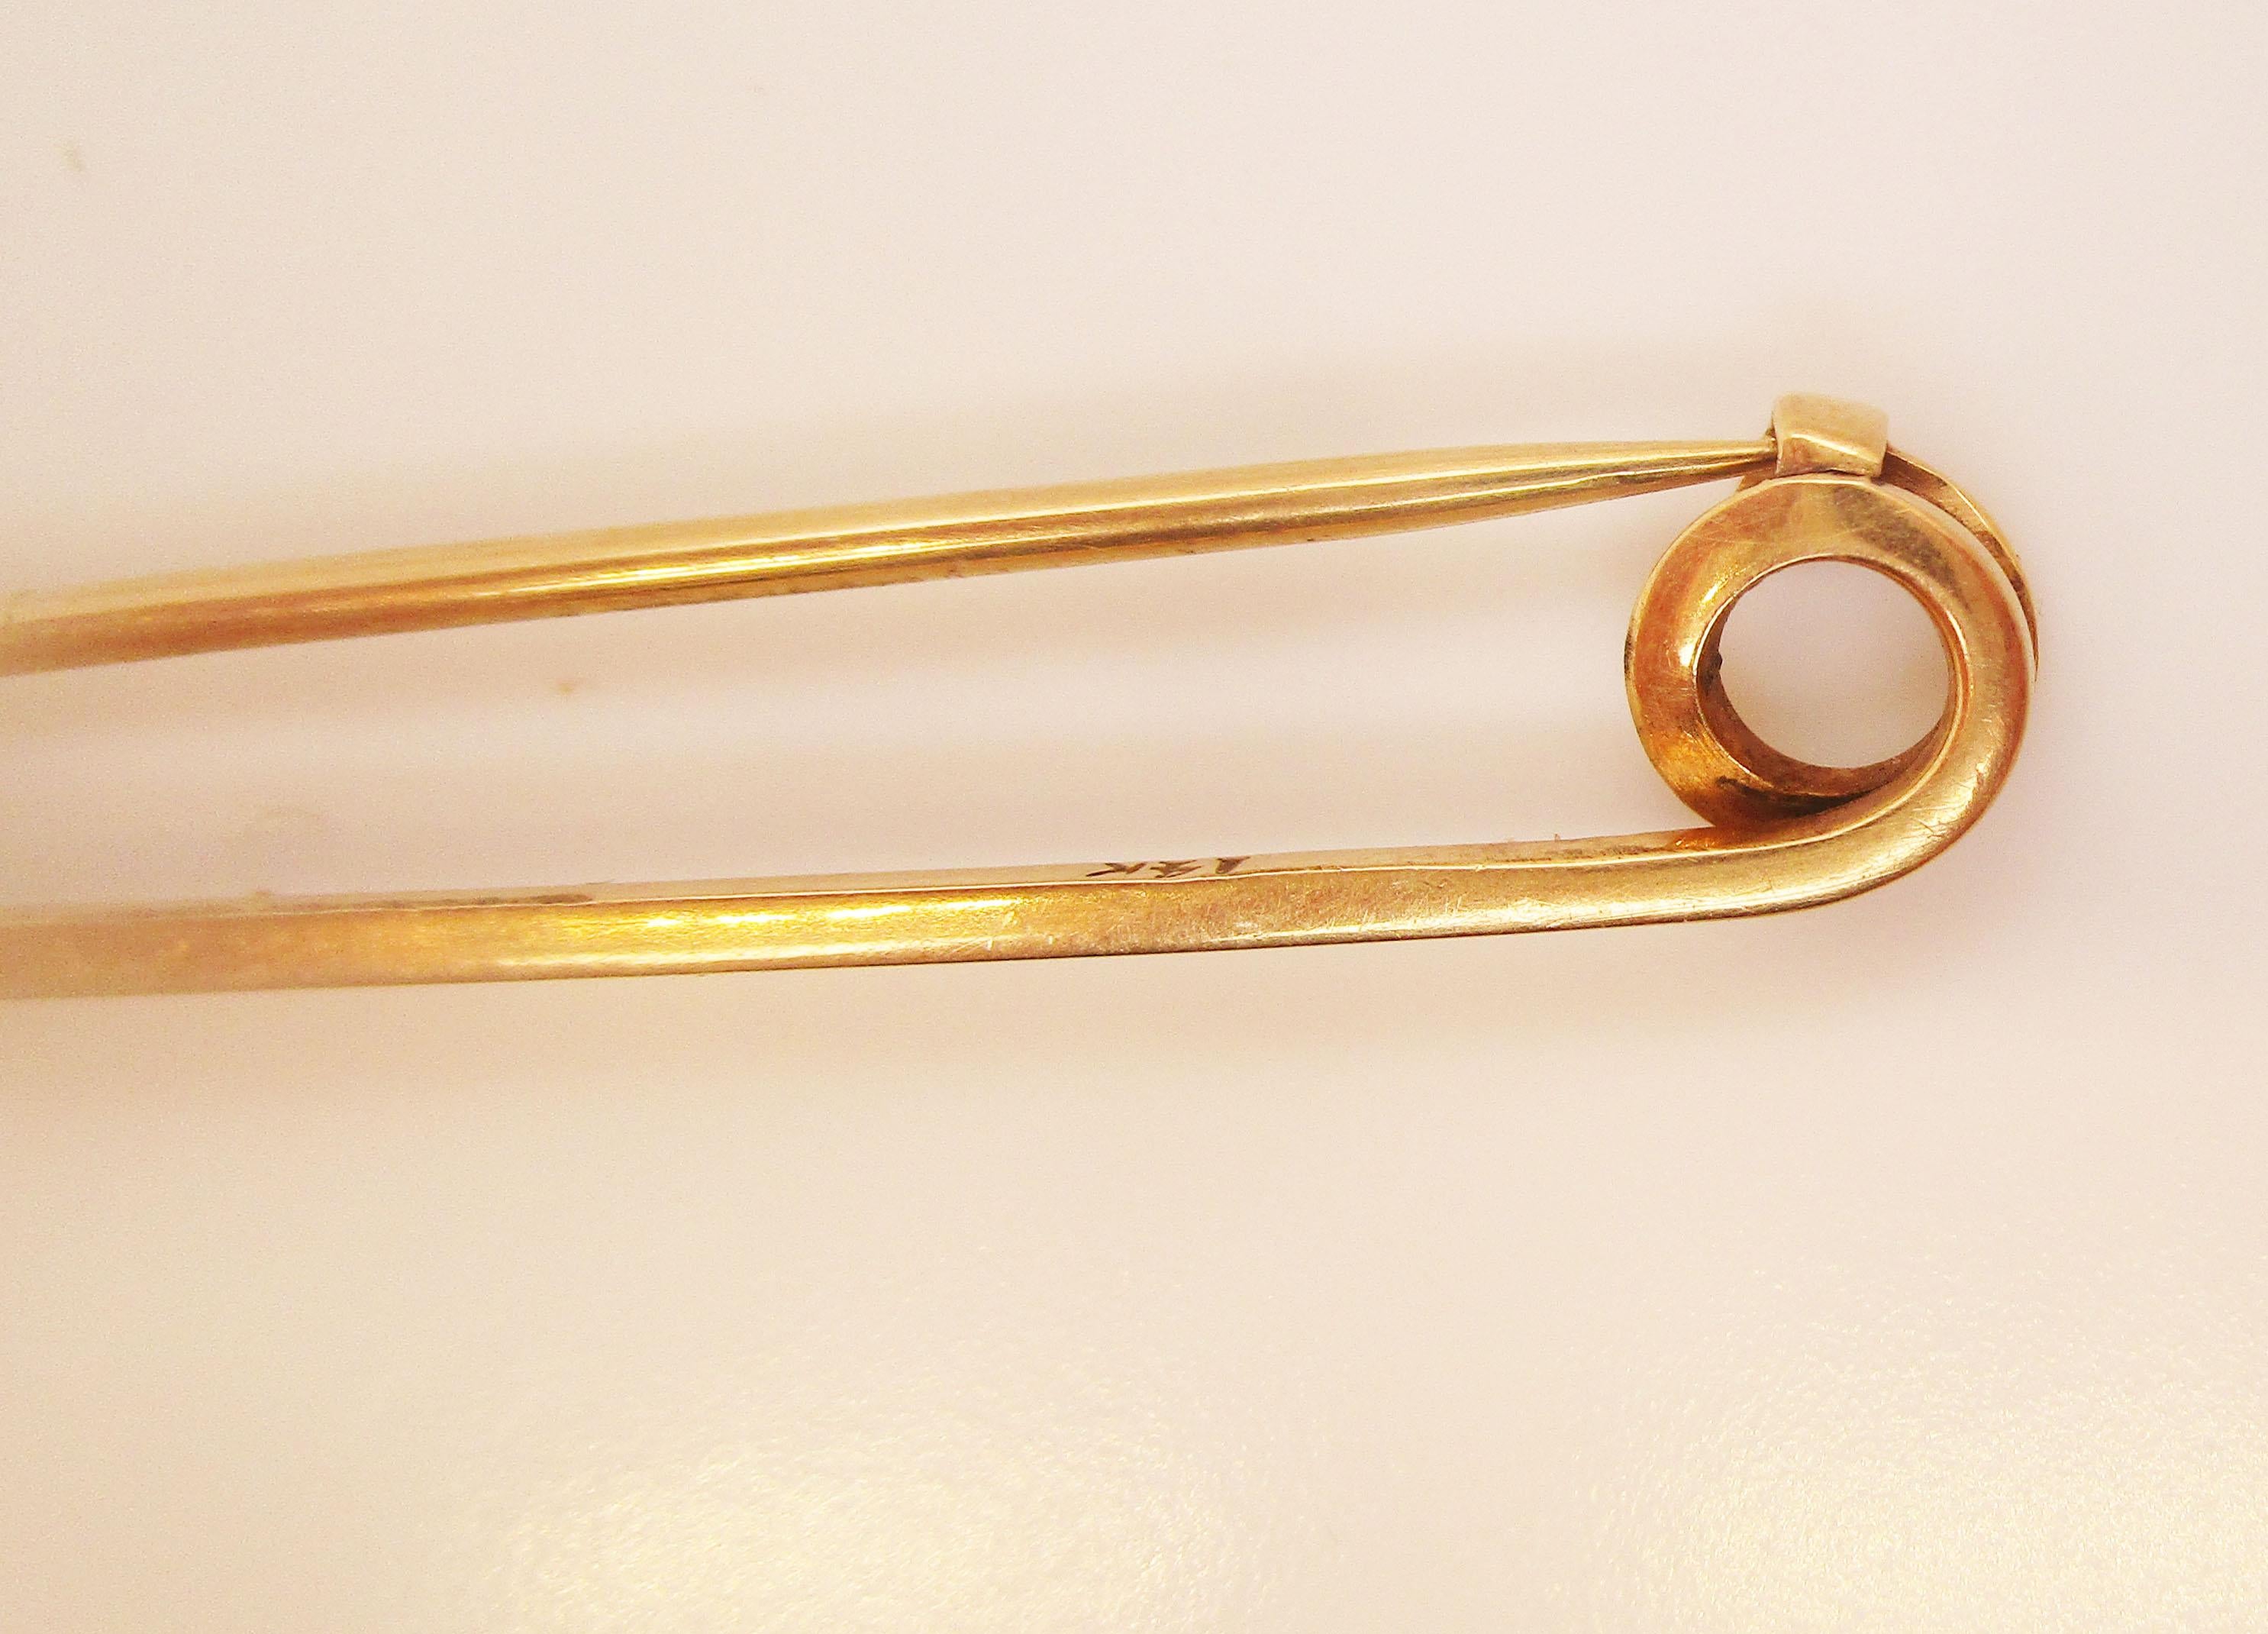 1910 Edwardian 14 Karat Yellow Gold Collar or Stock Pin In Good Condition For Sale In Lexington, KY